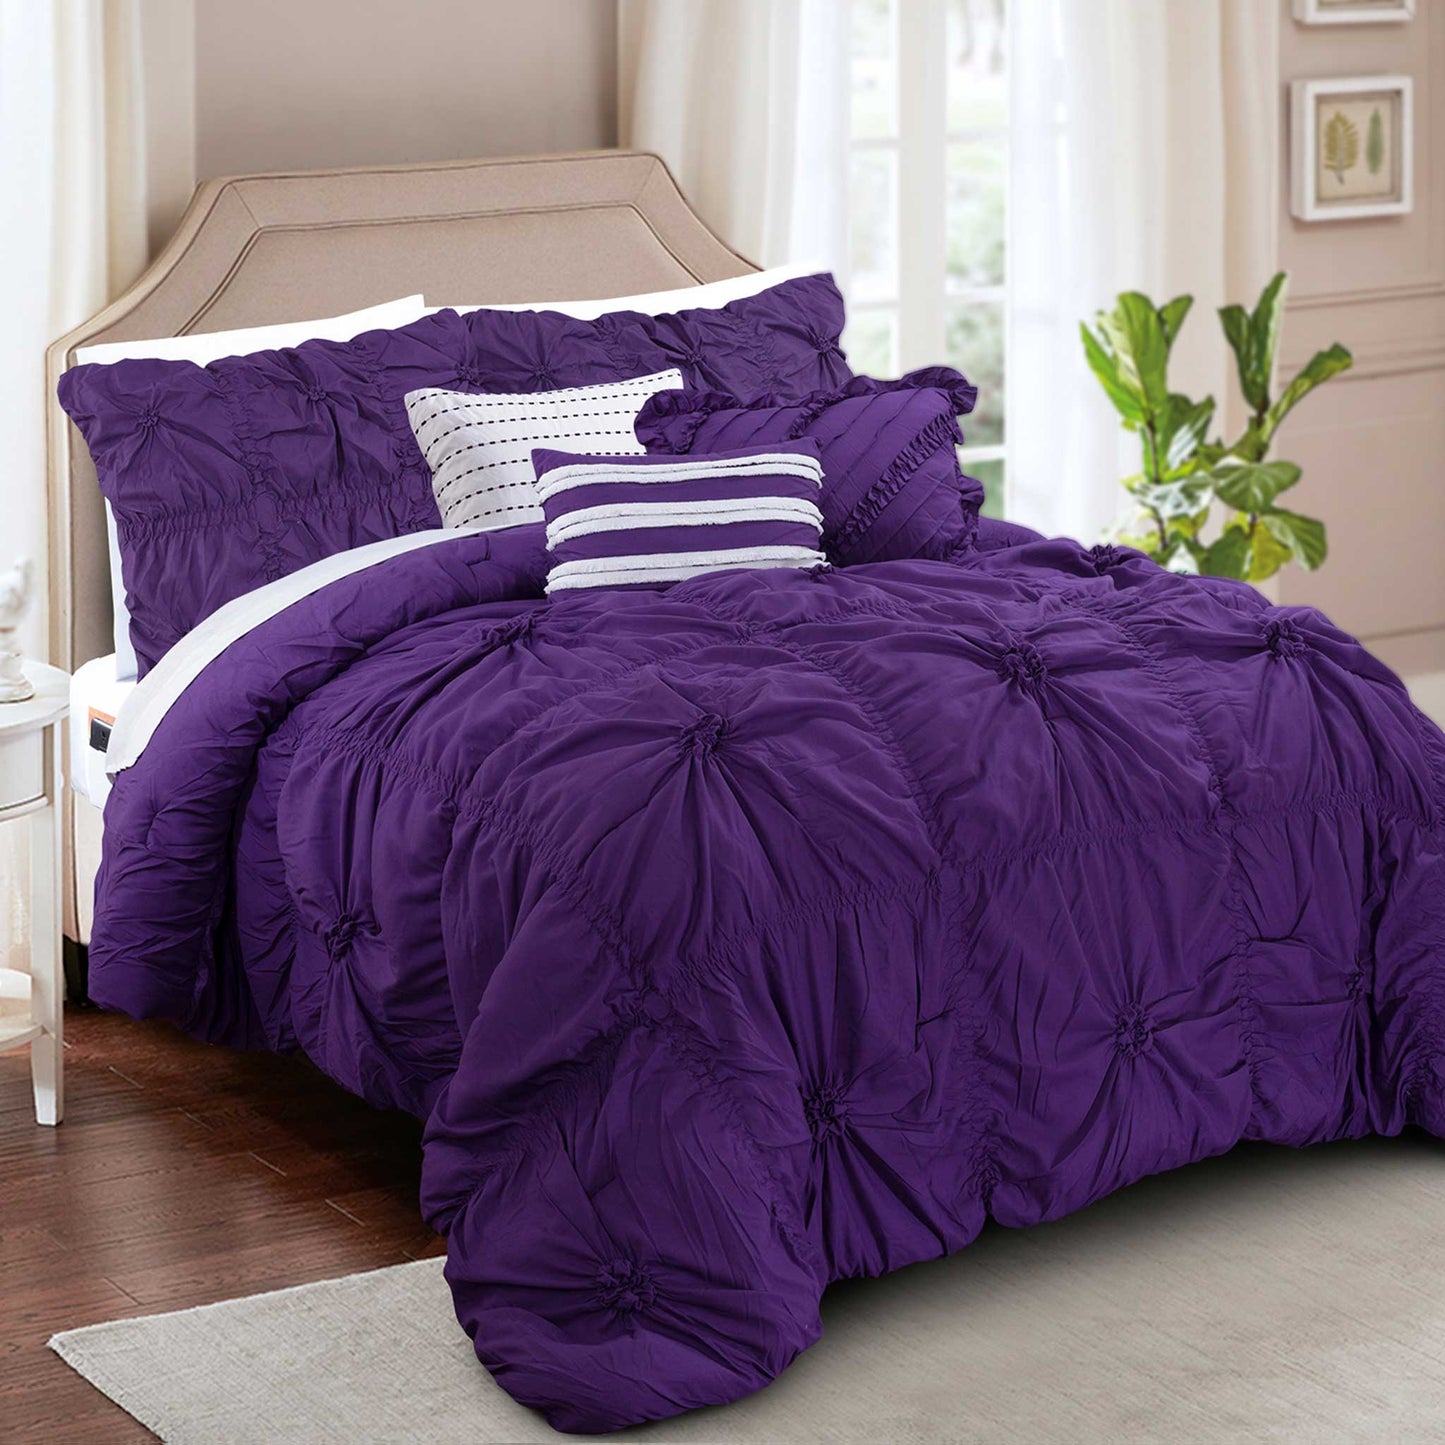 Elegant Comfort 12-Piece Amy Oversized Comforter Set - Includes 6-Piece Sheet Set with Double Sided Storage Pockets